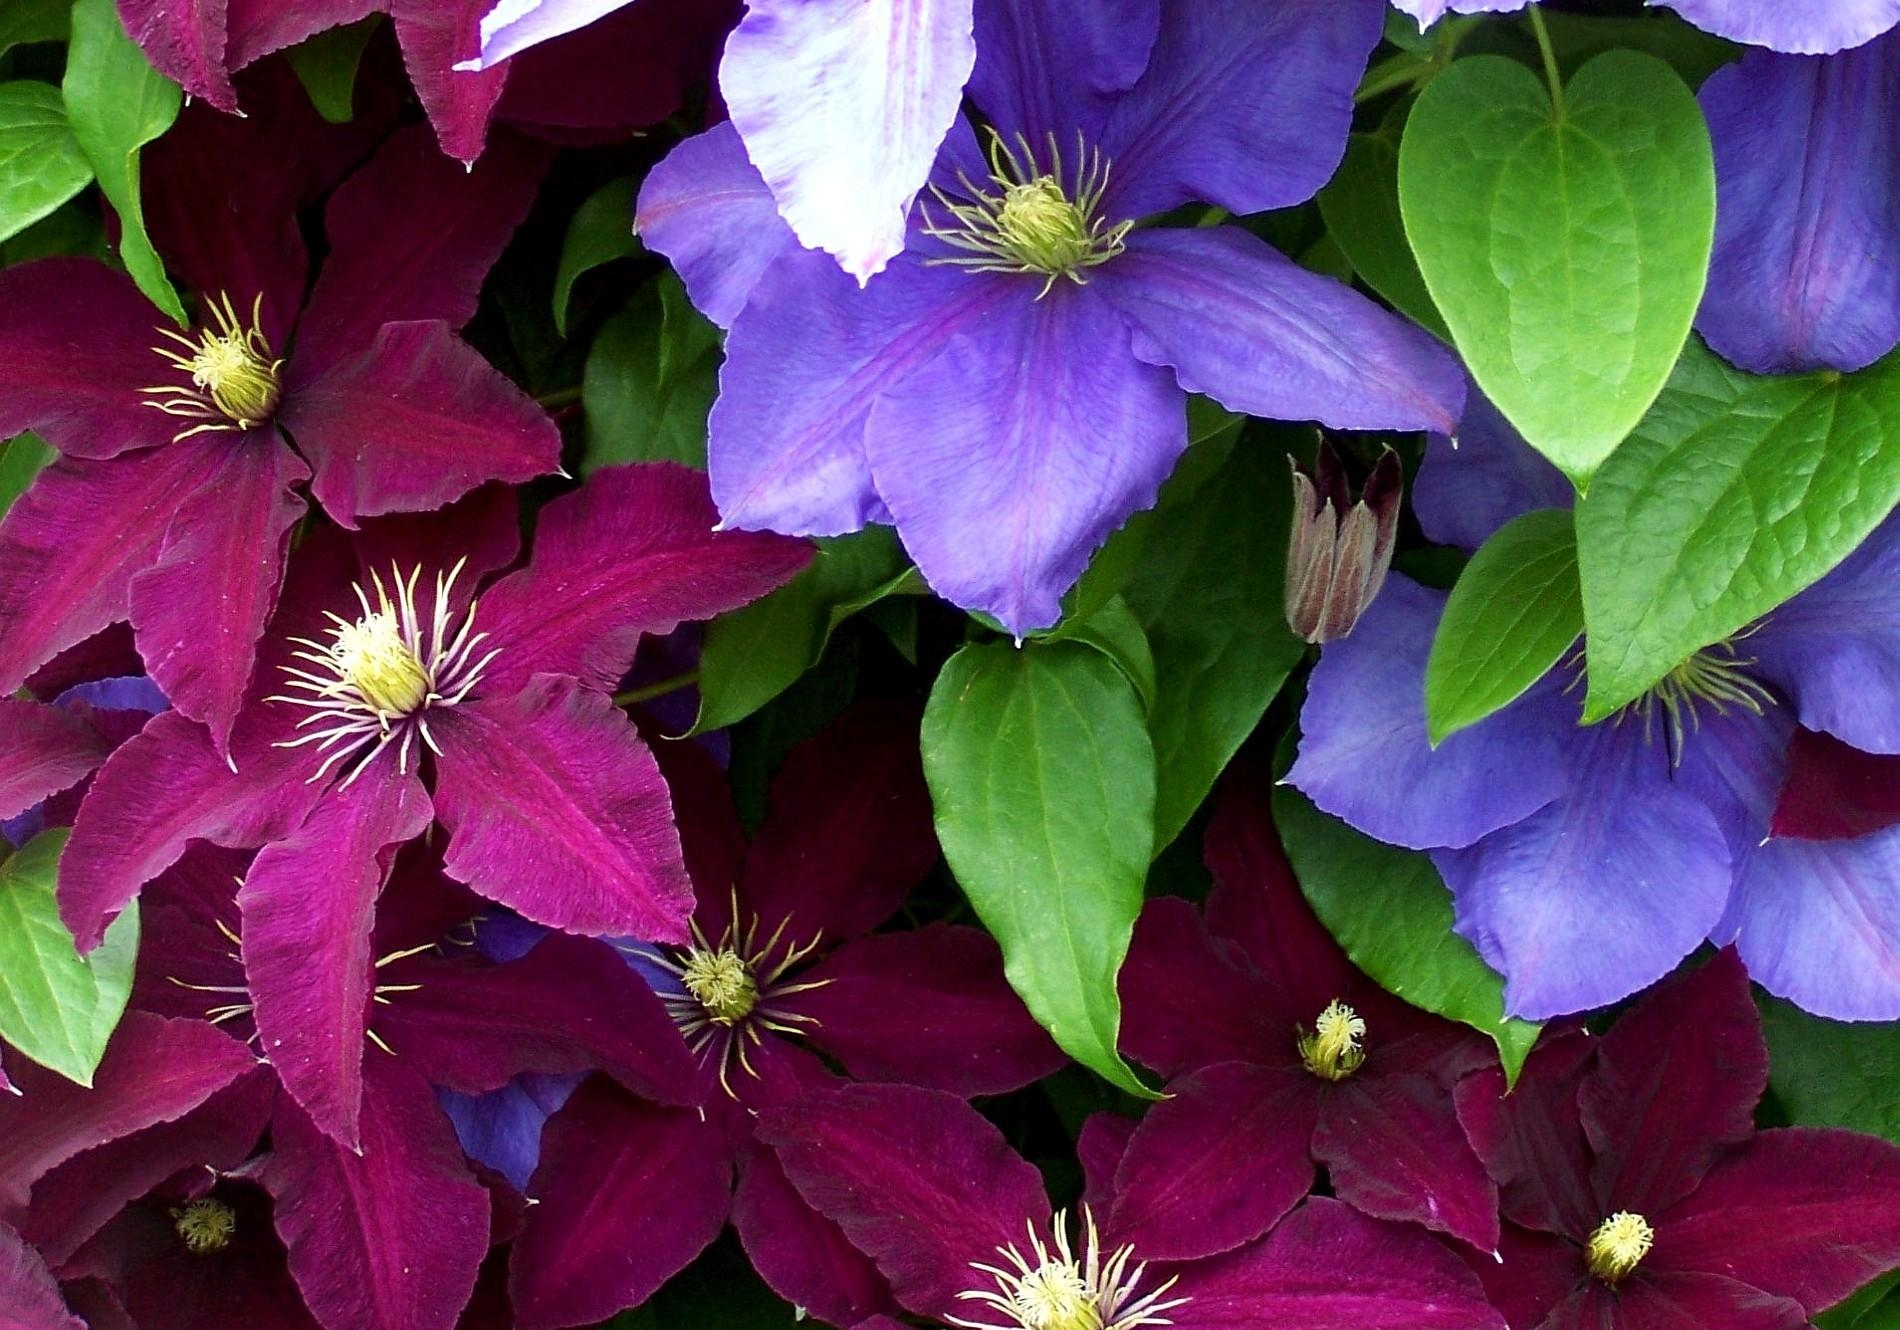 Clematis Flowers Bright Colorful Close Up Stock Photos